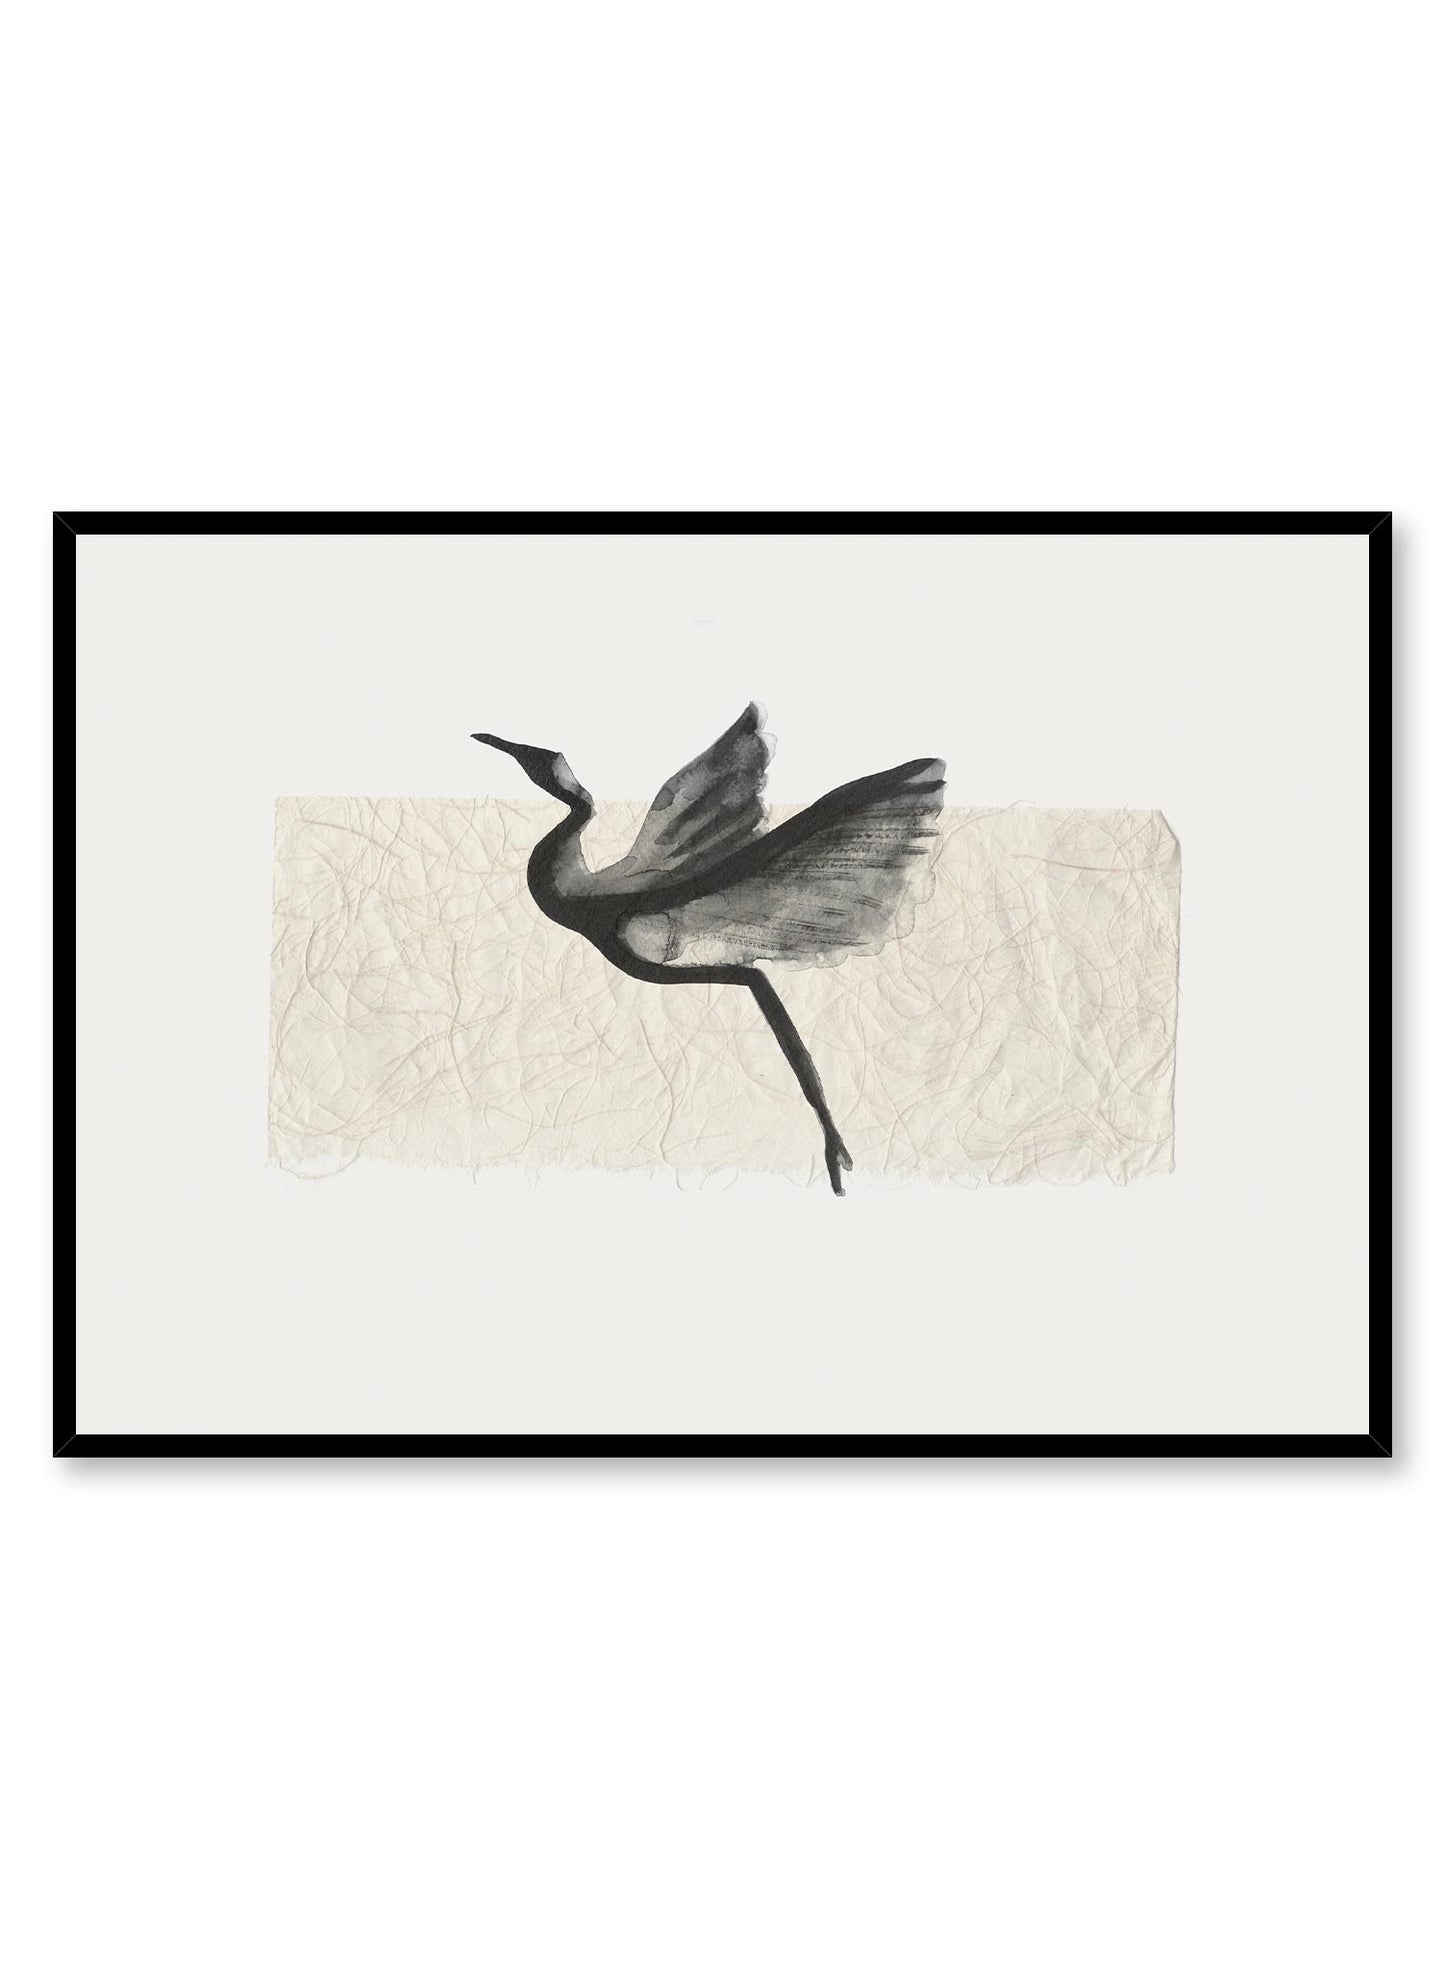 Ascend is a minimalist illustration by Opposite Wall of a majestic crane spreading its wings to fly out.